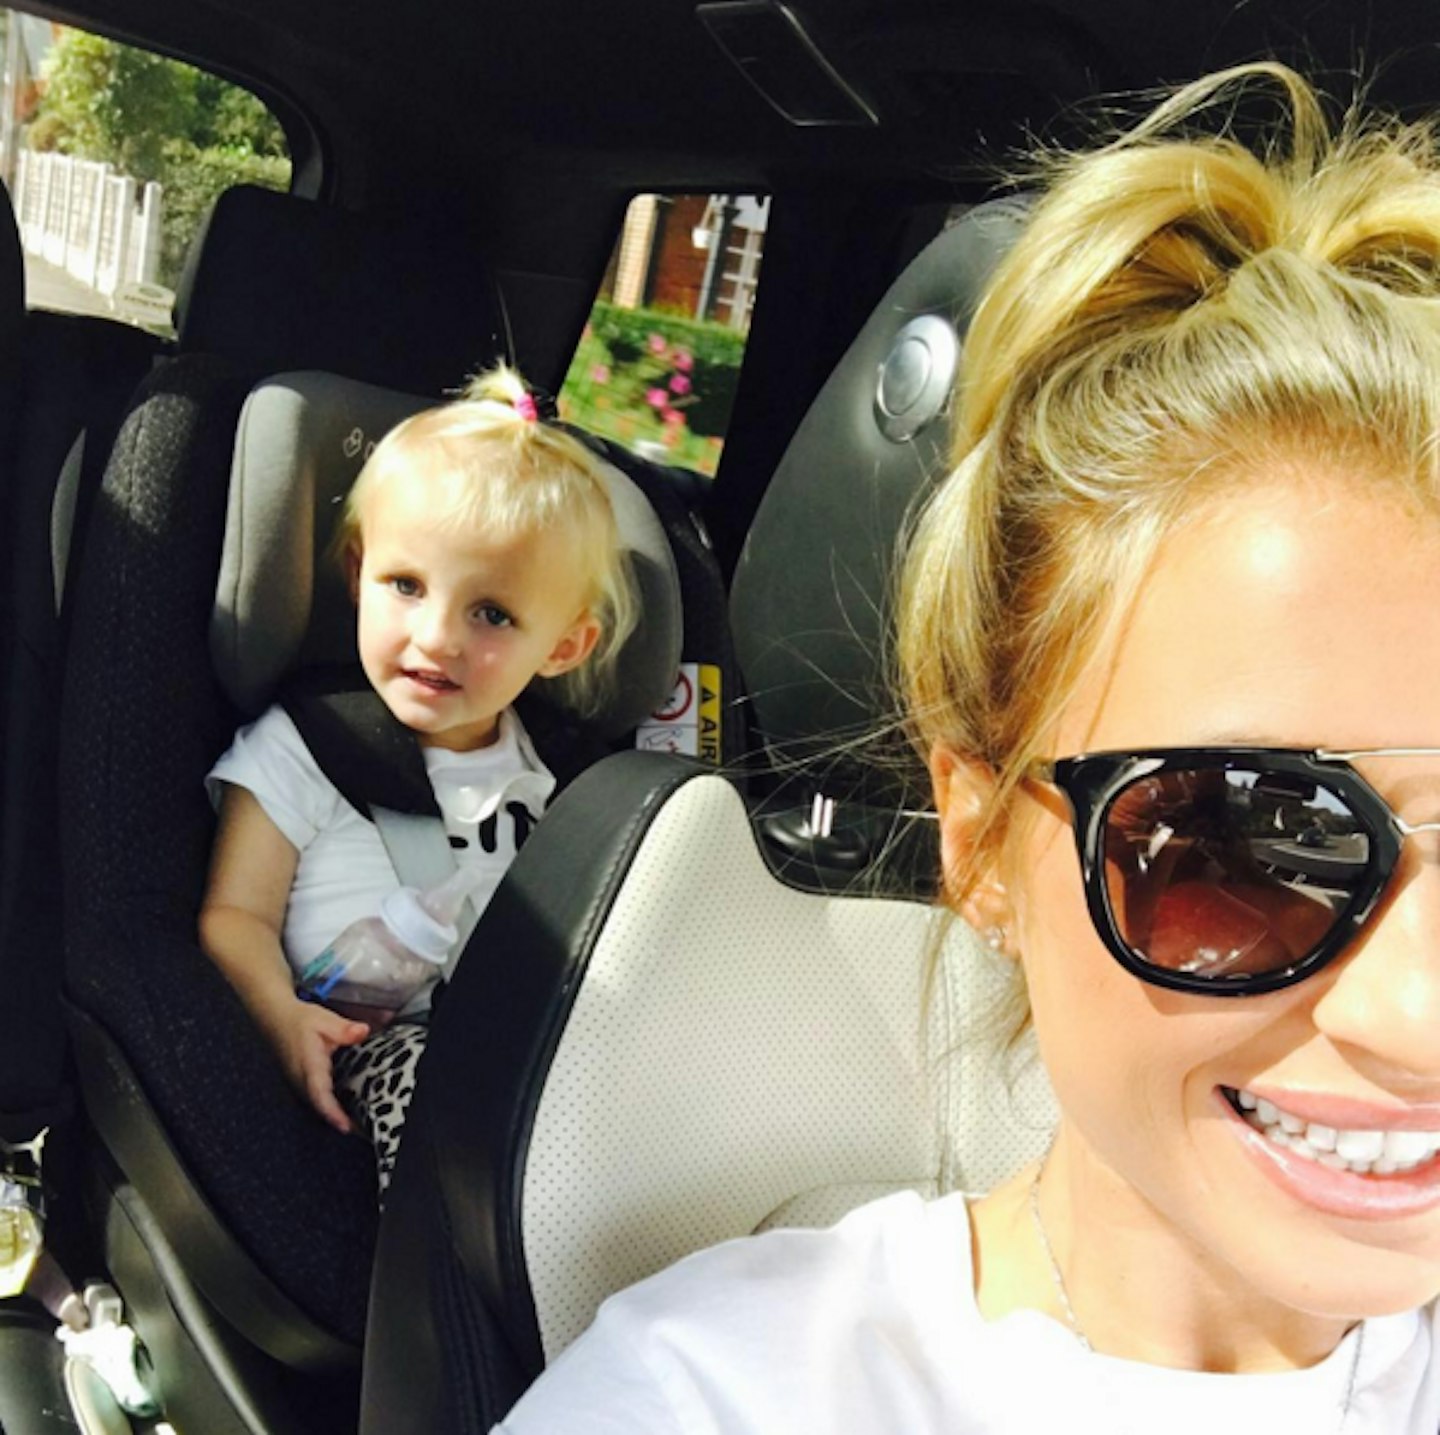 Billie Faiers Nelly